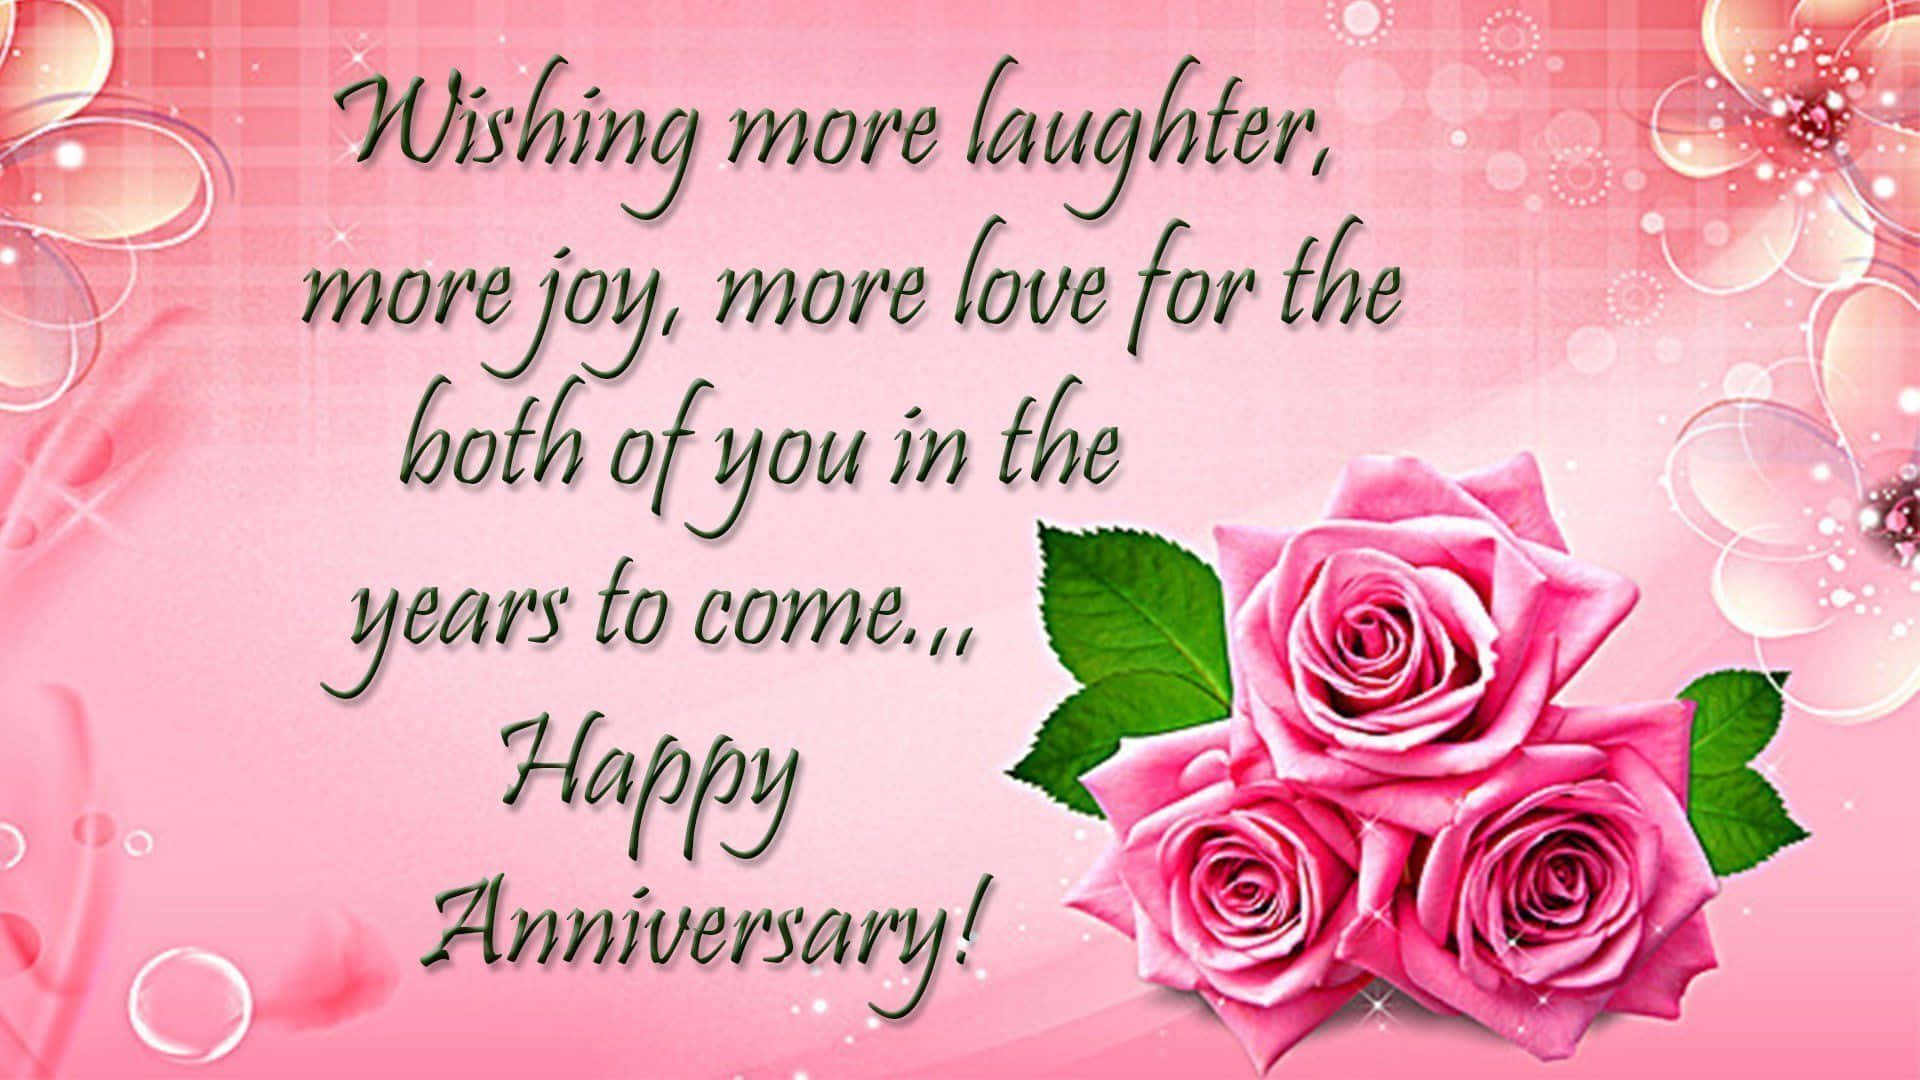 Wishing More Laughter Happy Anniversary Picture